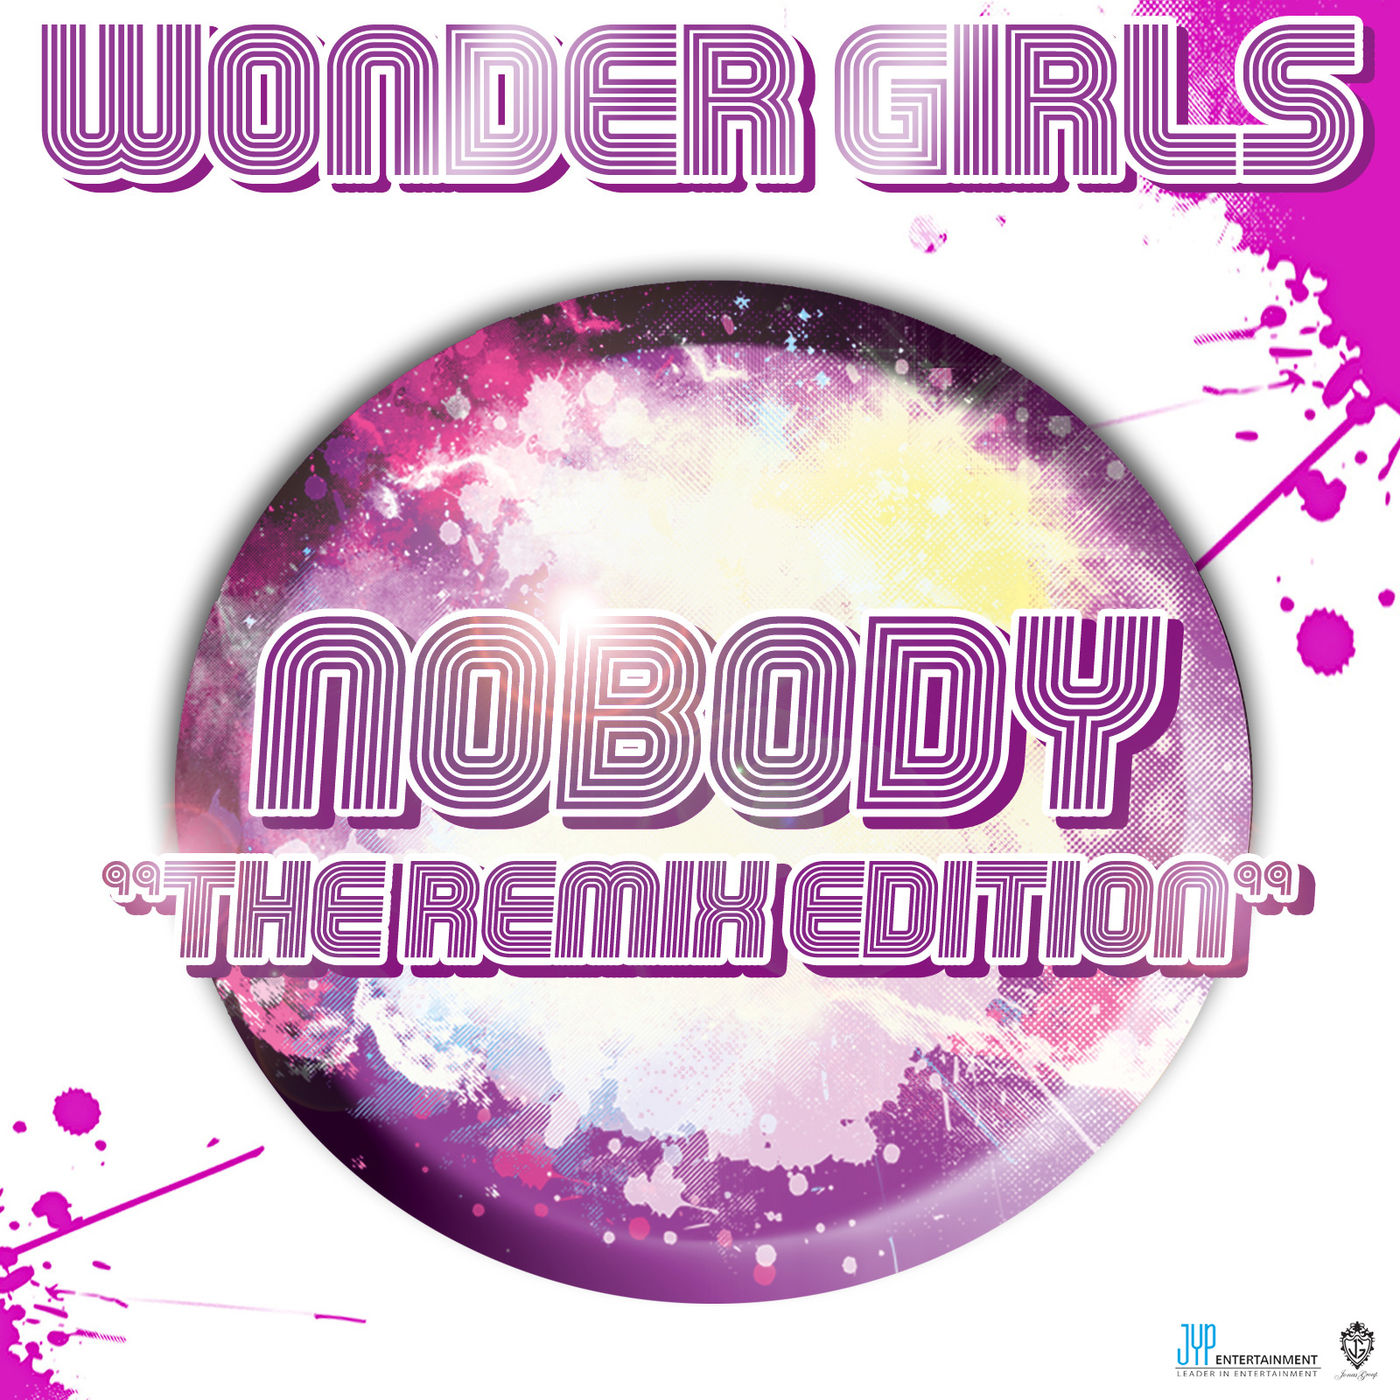 Nobody - Song Lyrics and Music by Wonder Girls arranged by _Brendz on Smule  Social Singing app